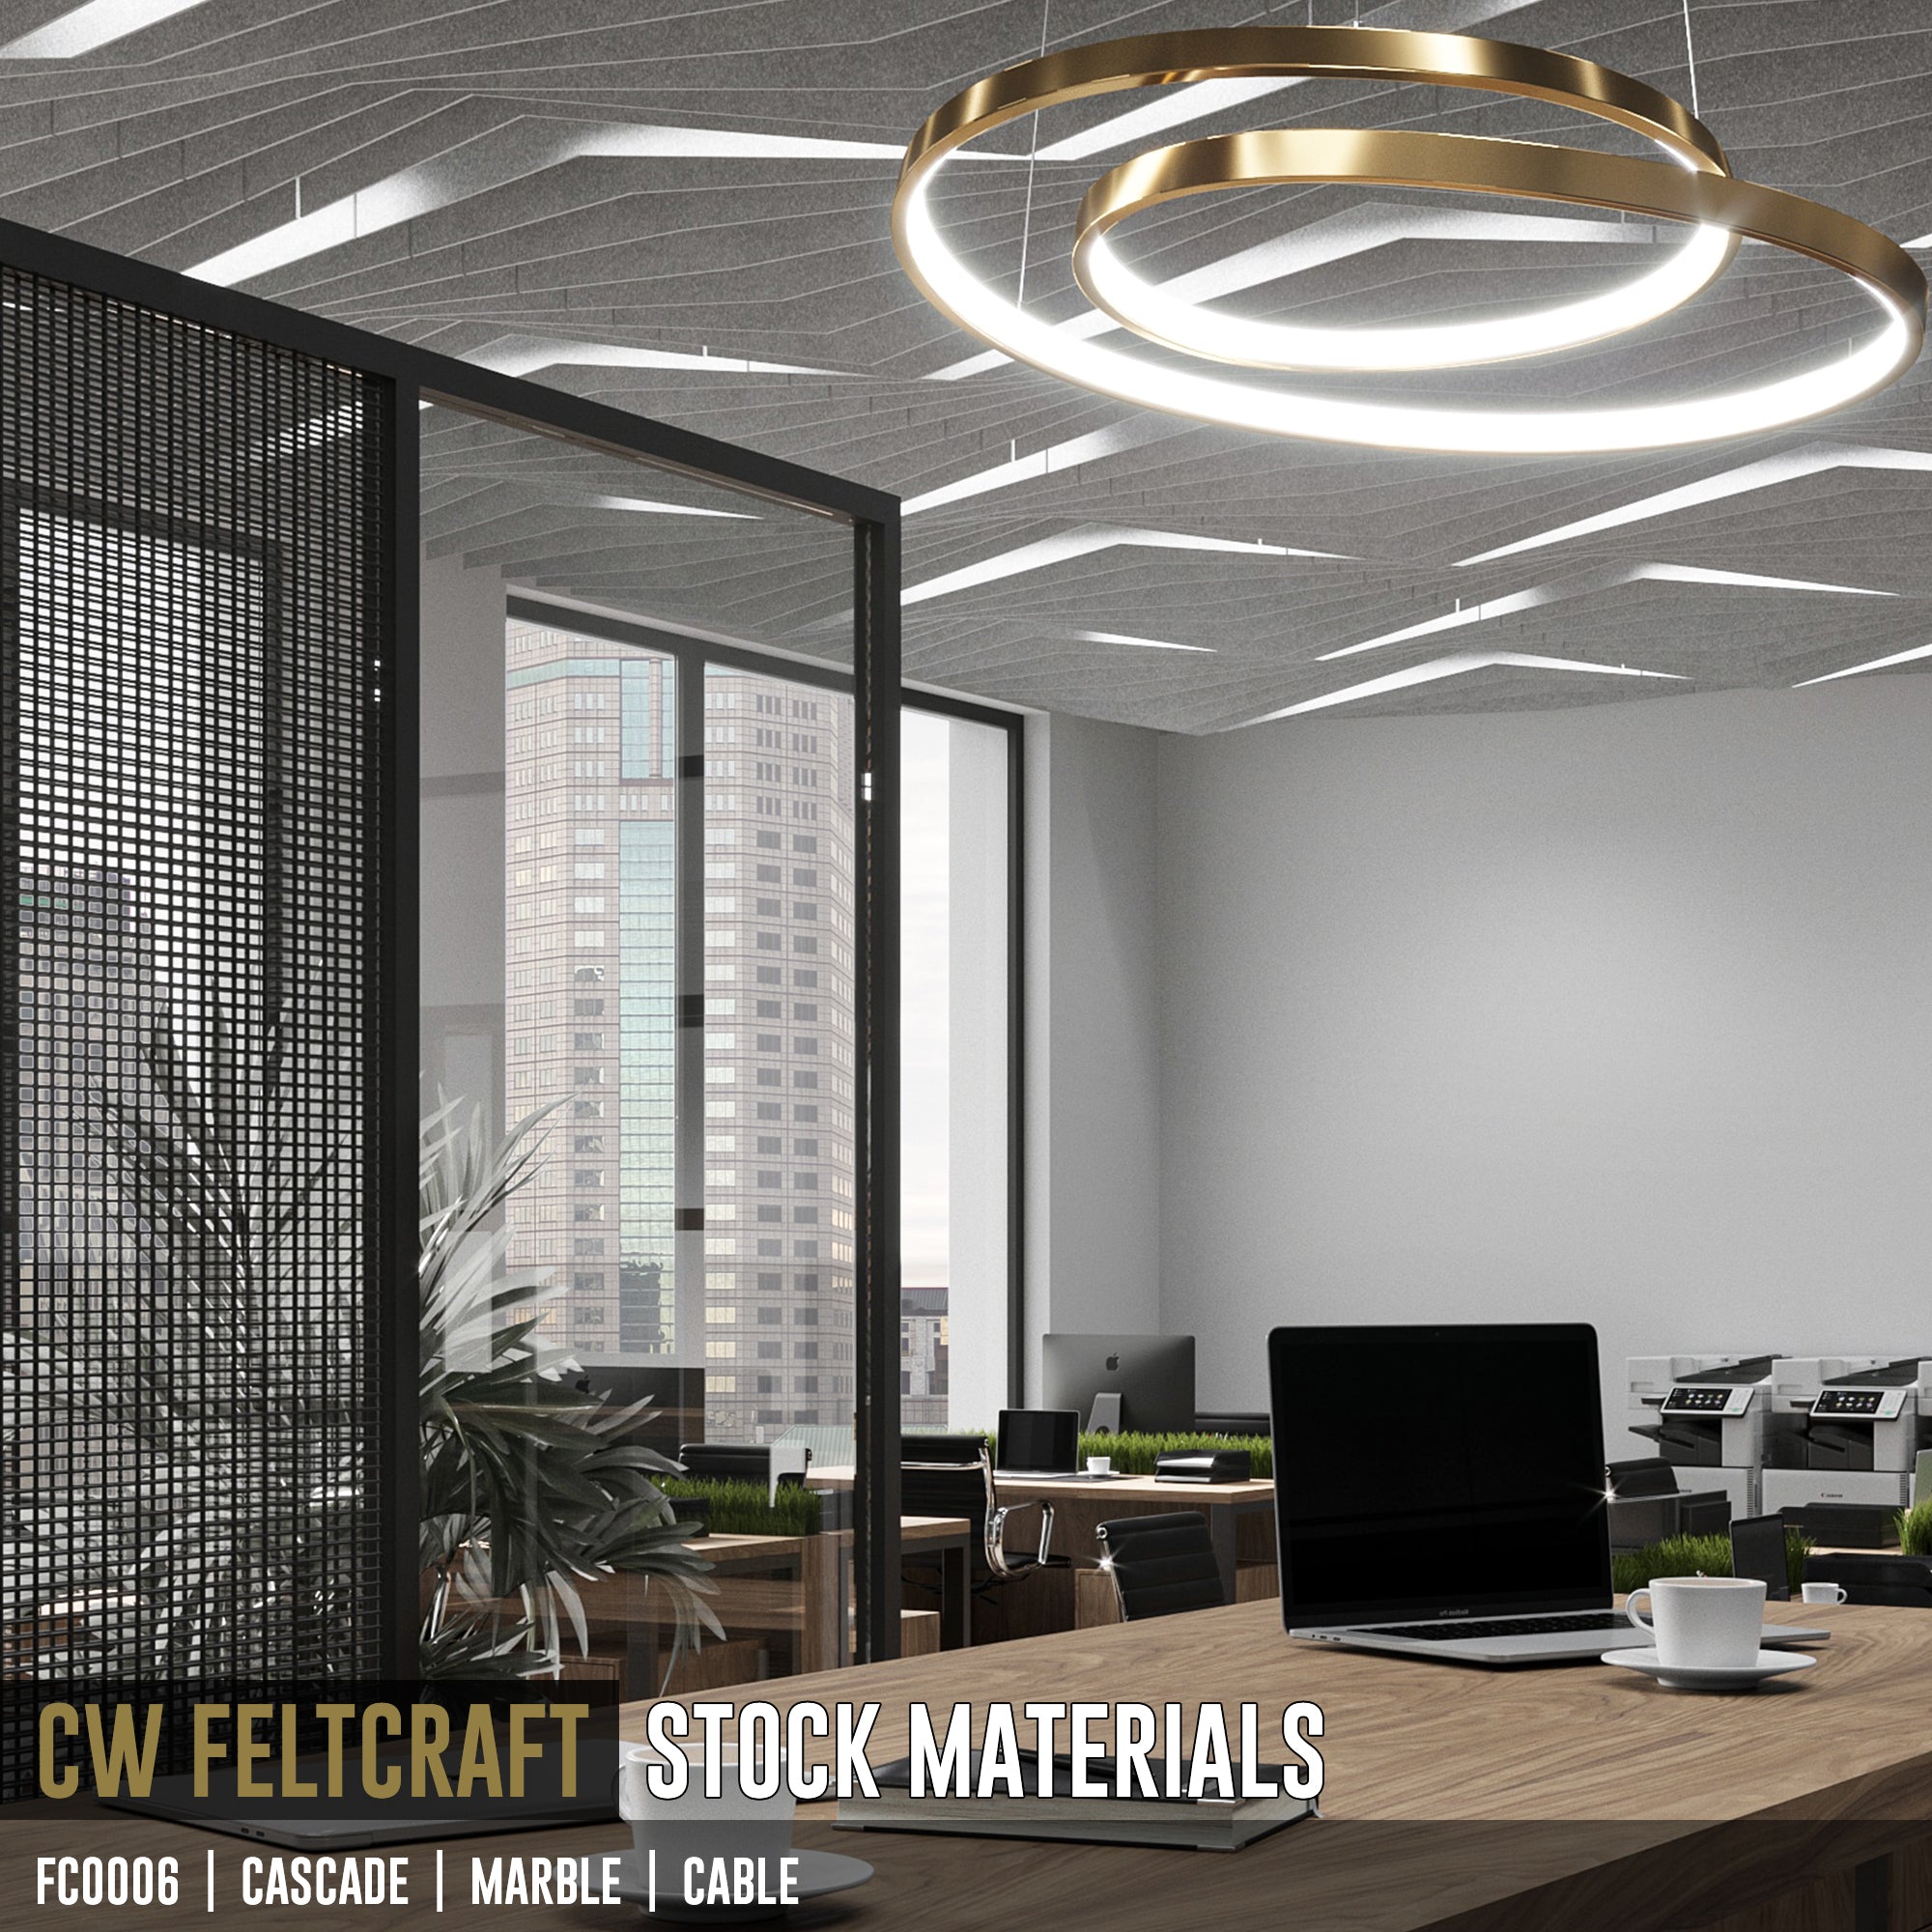 FC0006 | Cascade | Suspended Acoustical Ceiling Baffles System